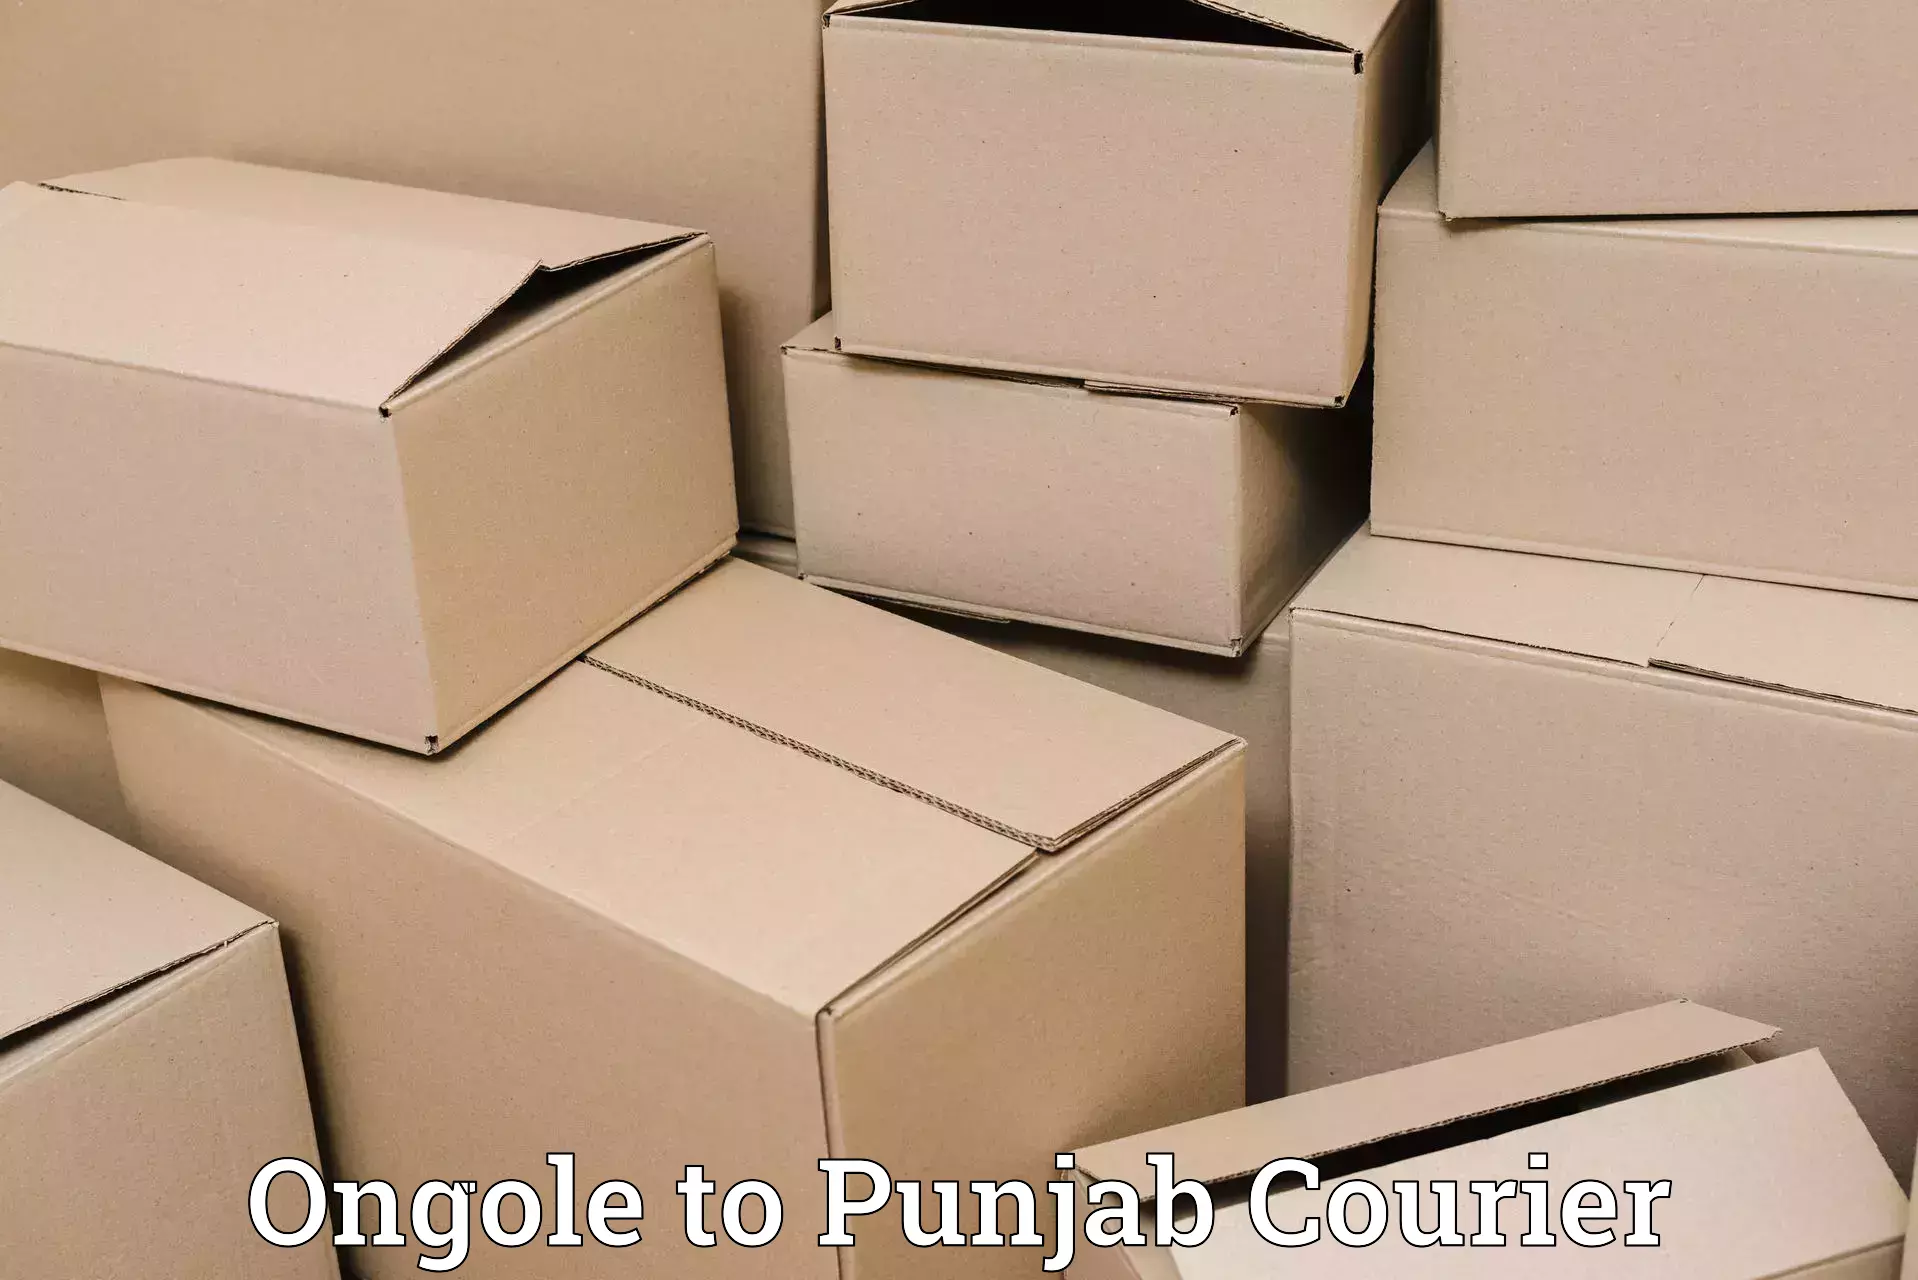 Nationwide courier service Ongole to Mohali